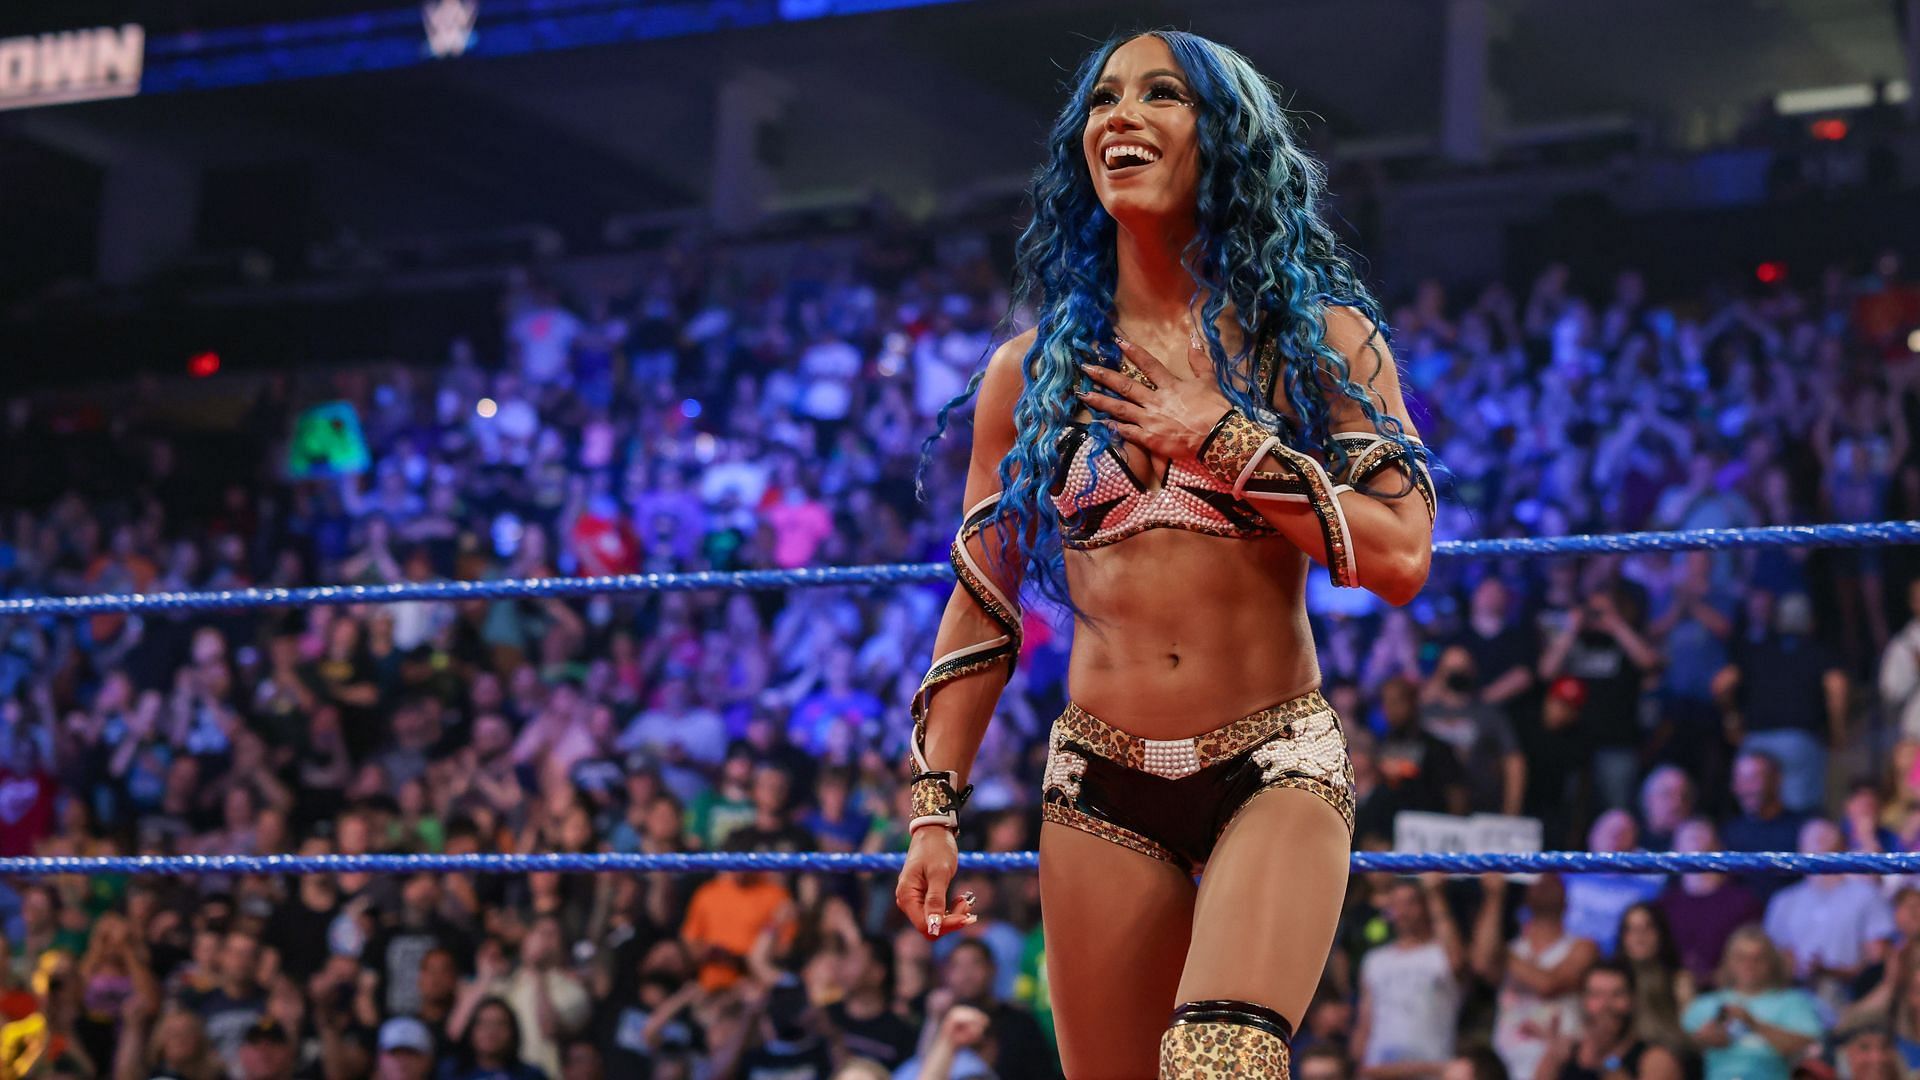 Top AEW star wants WWE Superstar Sasha Banks to become first female member of his faction - Sportskeeda